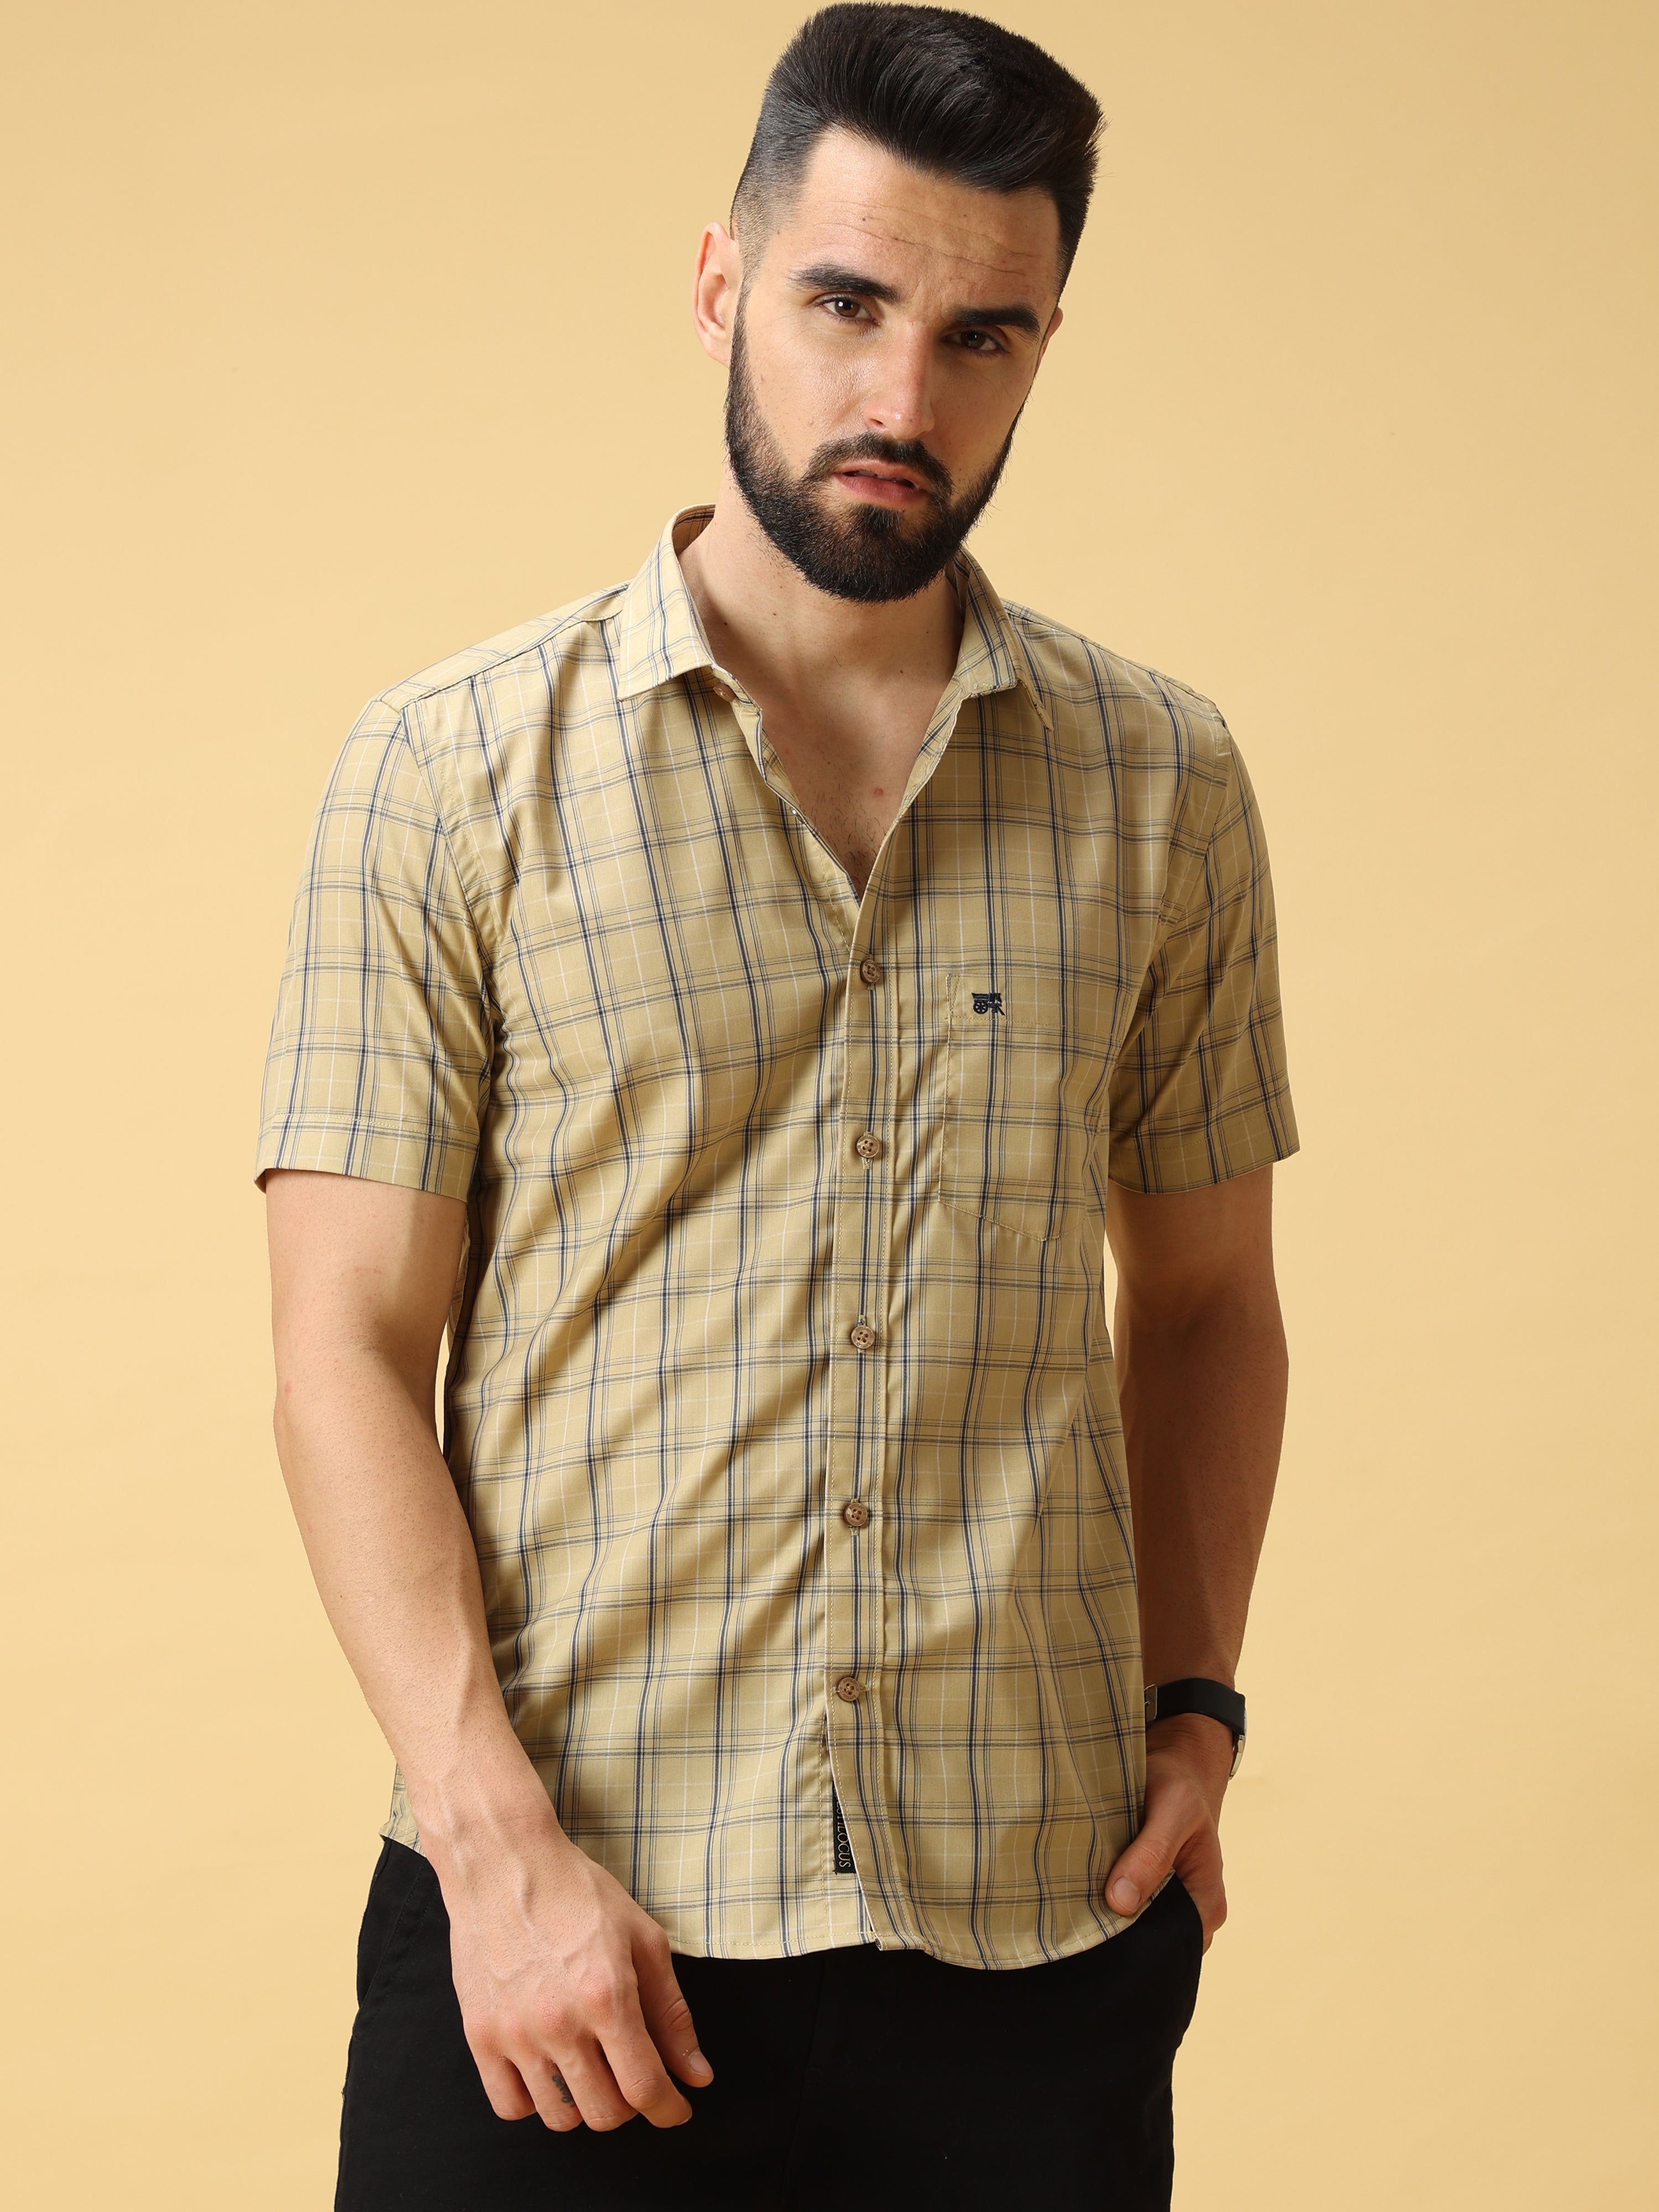 Cream Navy Check Half sleeve Shirt shop online at Estilocus. • Half-sleeve check shirt• Cut and sew placket• Regular collar• Double button square cuff.• Single pocket with logo embroidery• Curved hemline• Finest quality sewing• Machine wash care• Suitable